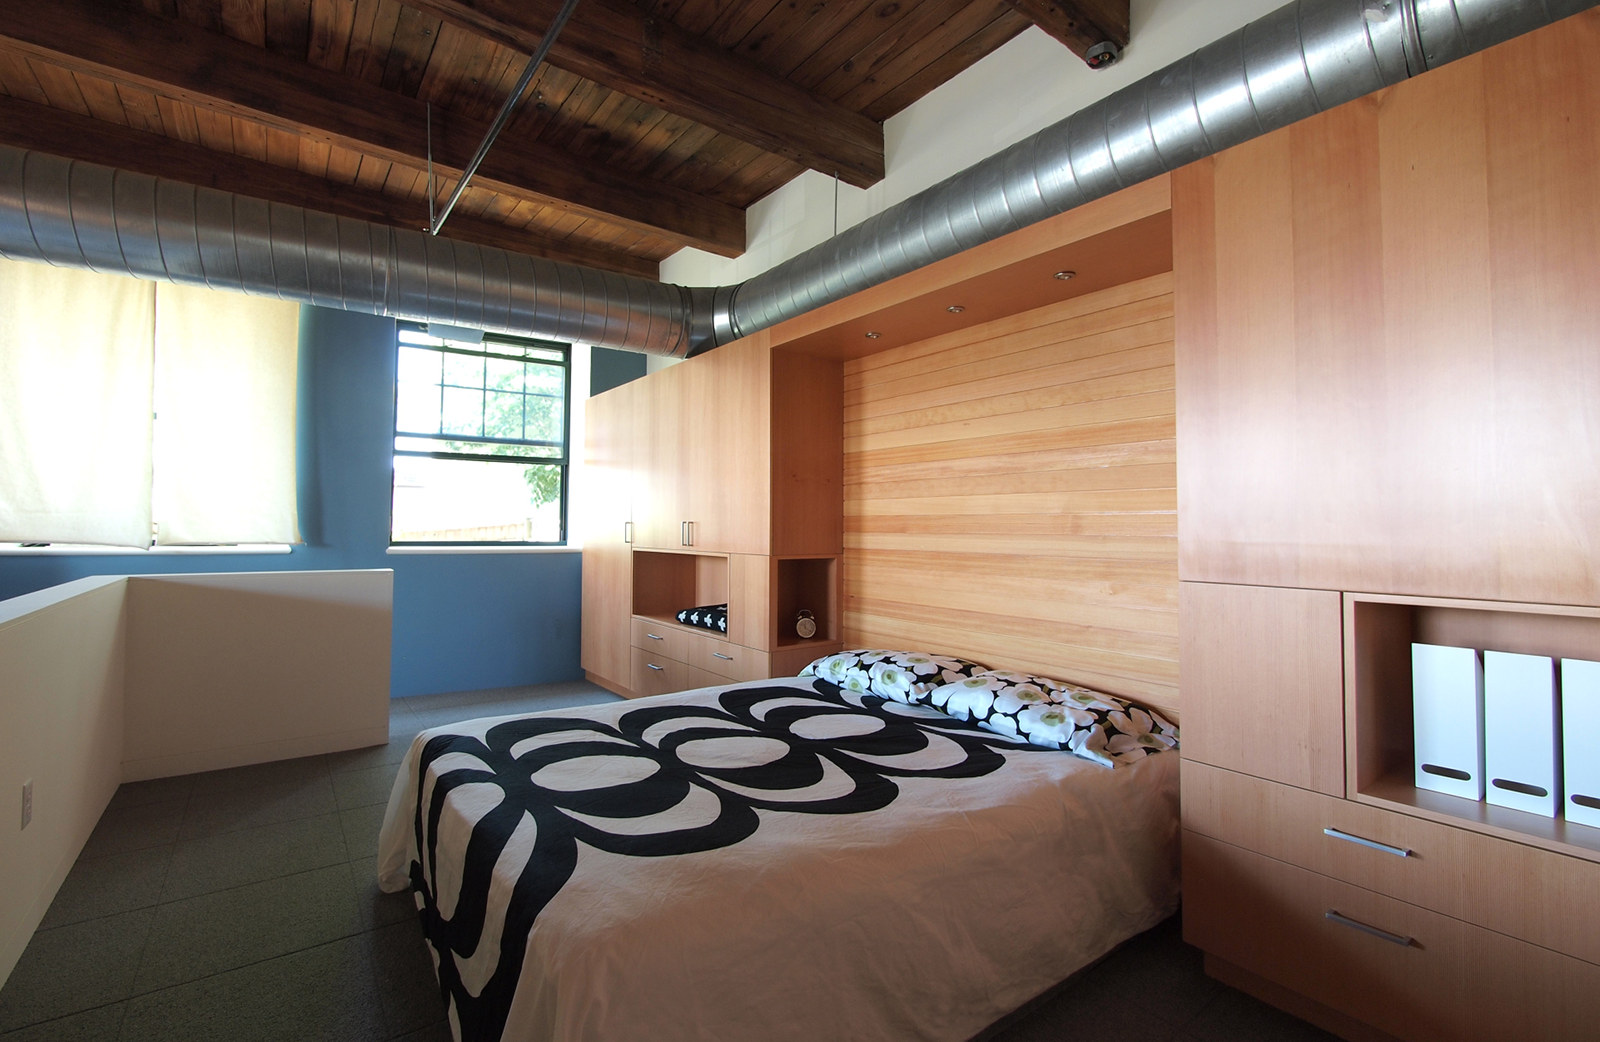 Industrial loft renovation, with modern custom built-in cabinetry around bed and custom wood headboard.